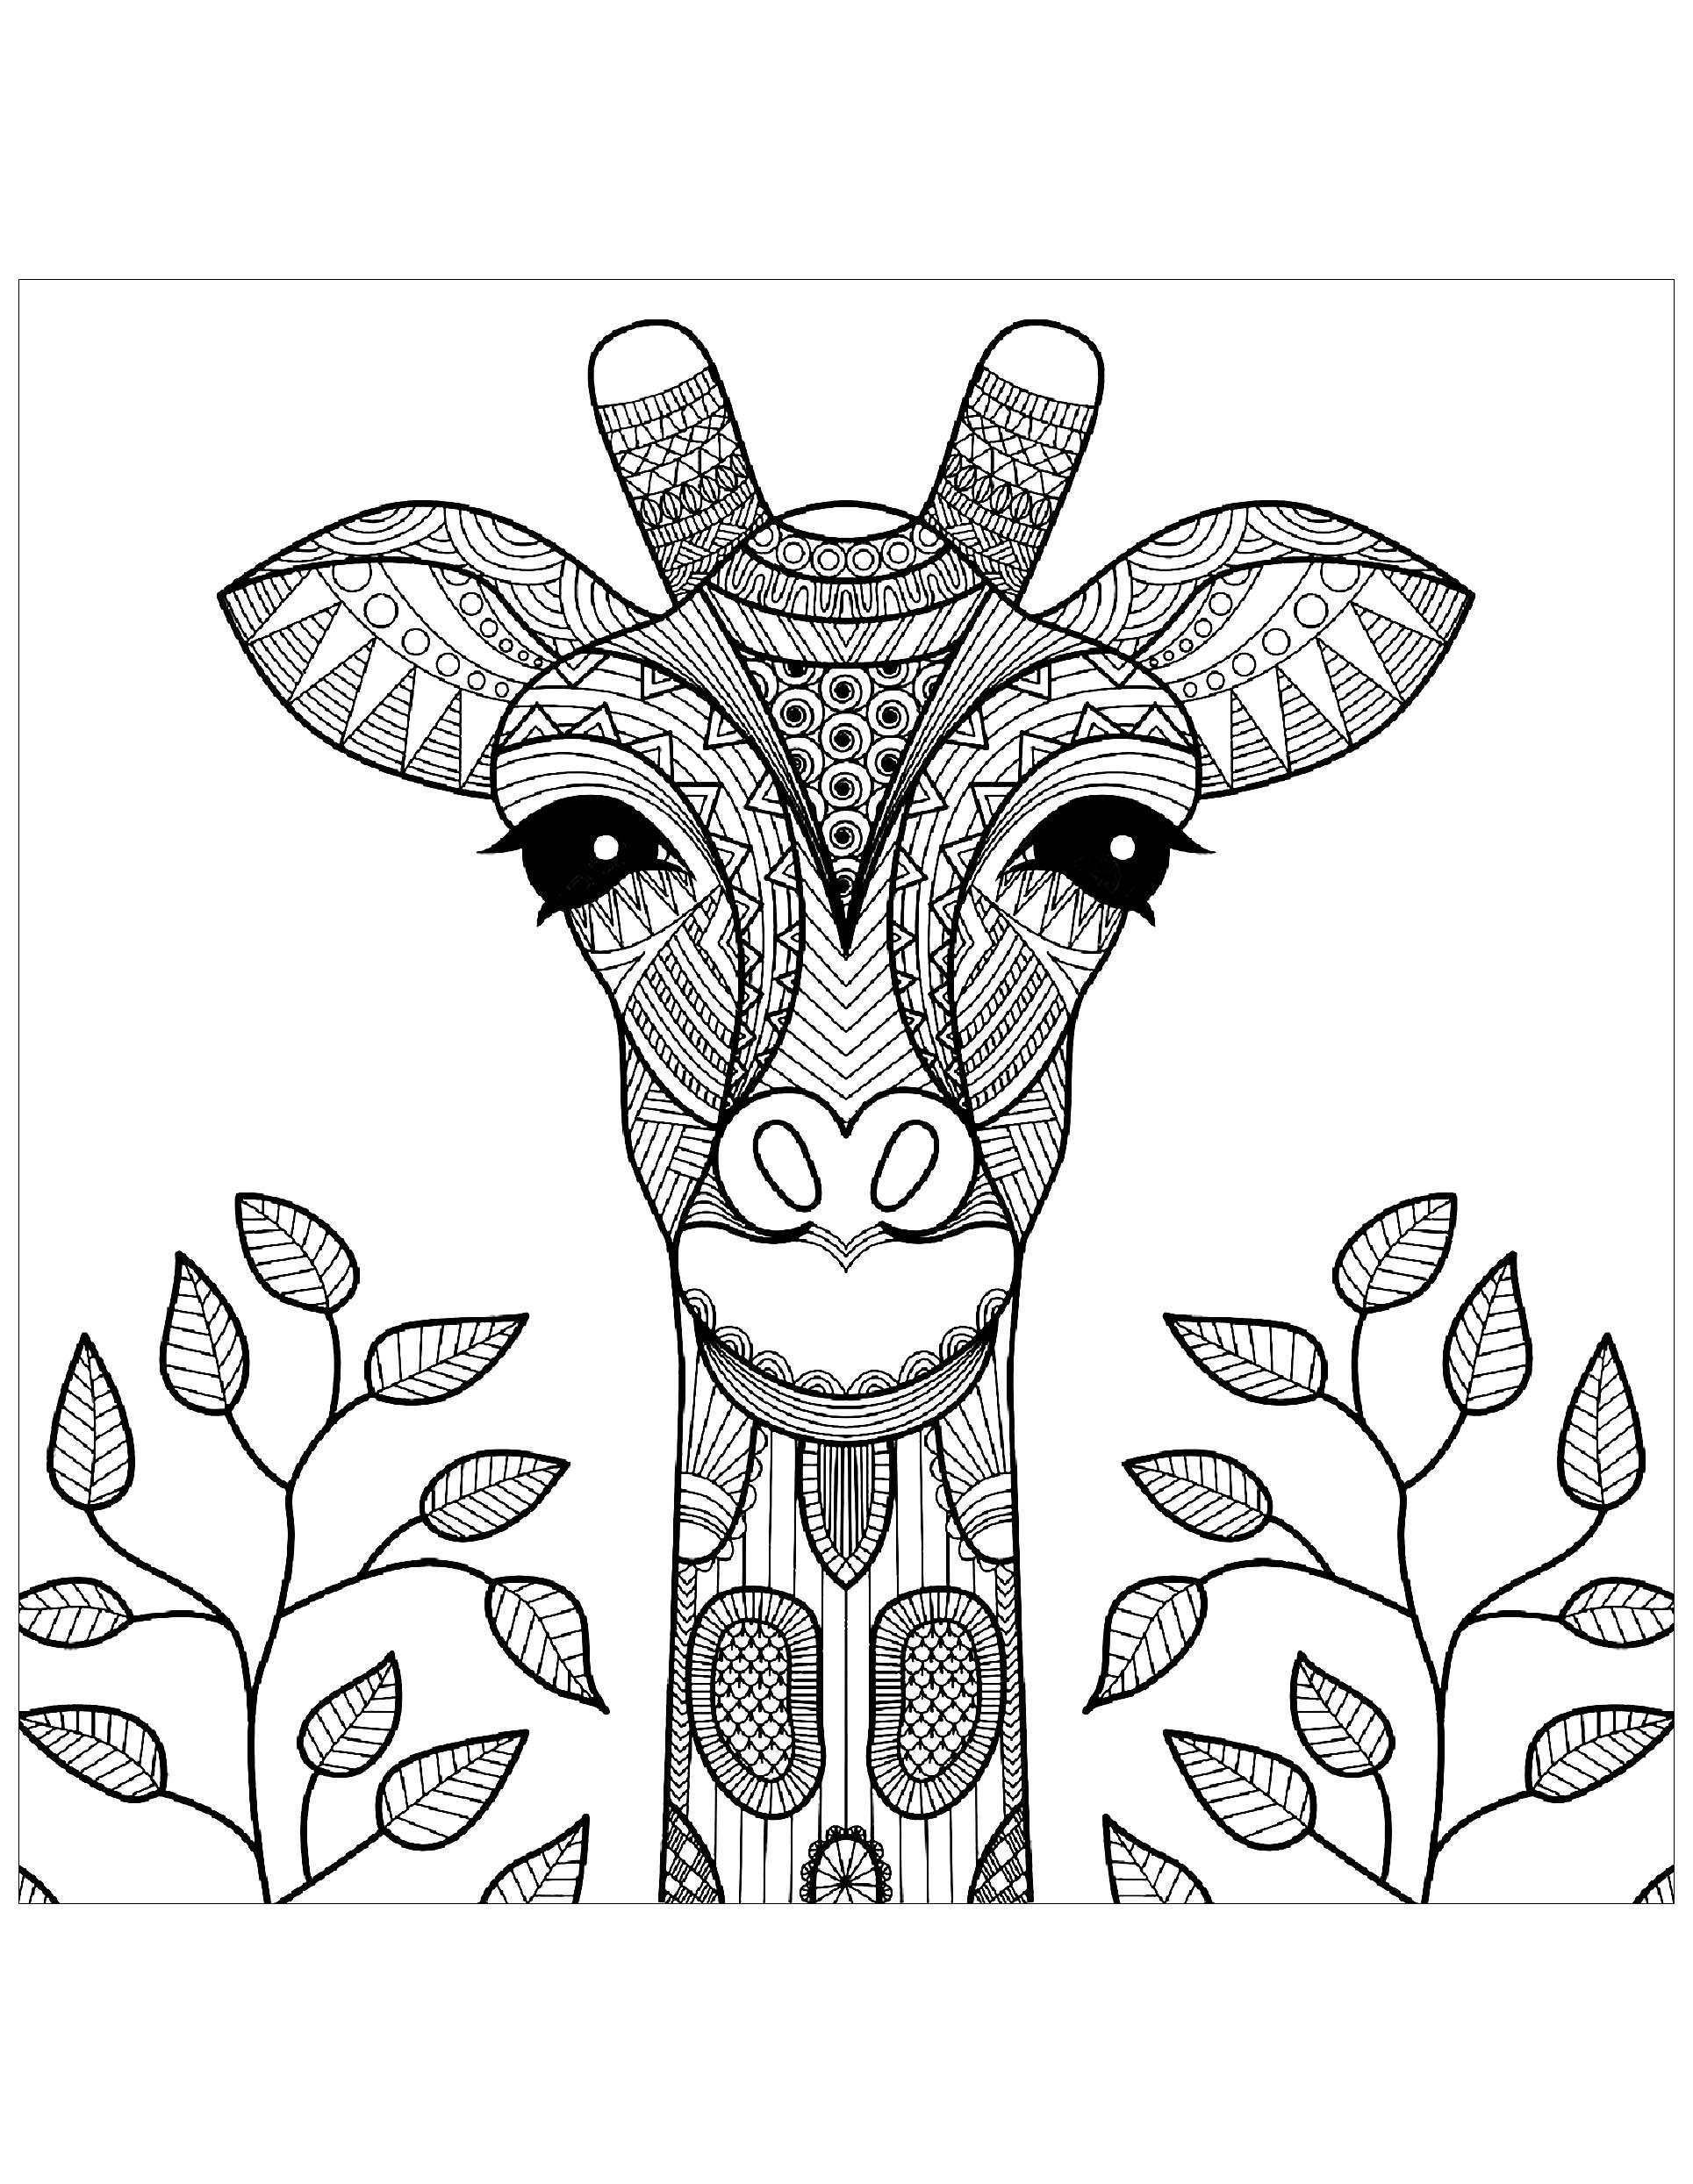 Coloring Websites For Kids
 Giraffes to color for children Giraffes Kids Coloring Pages